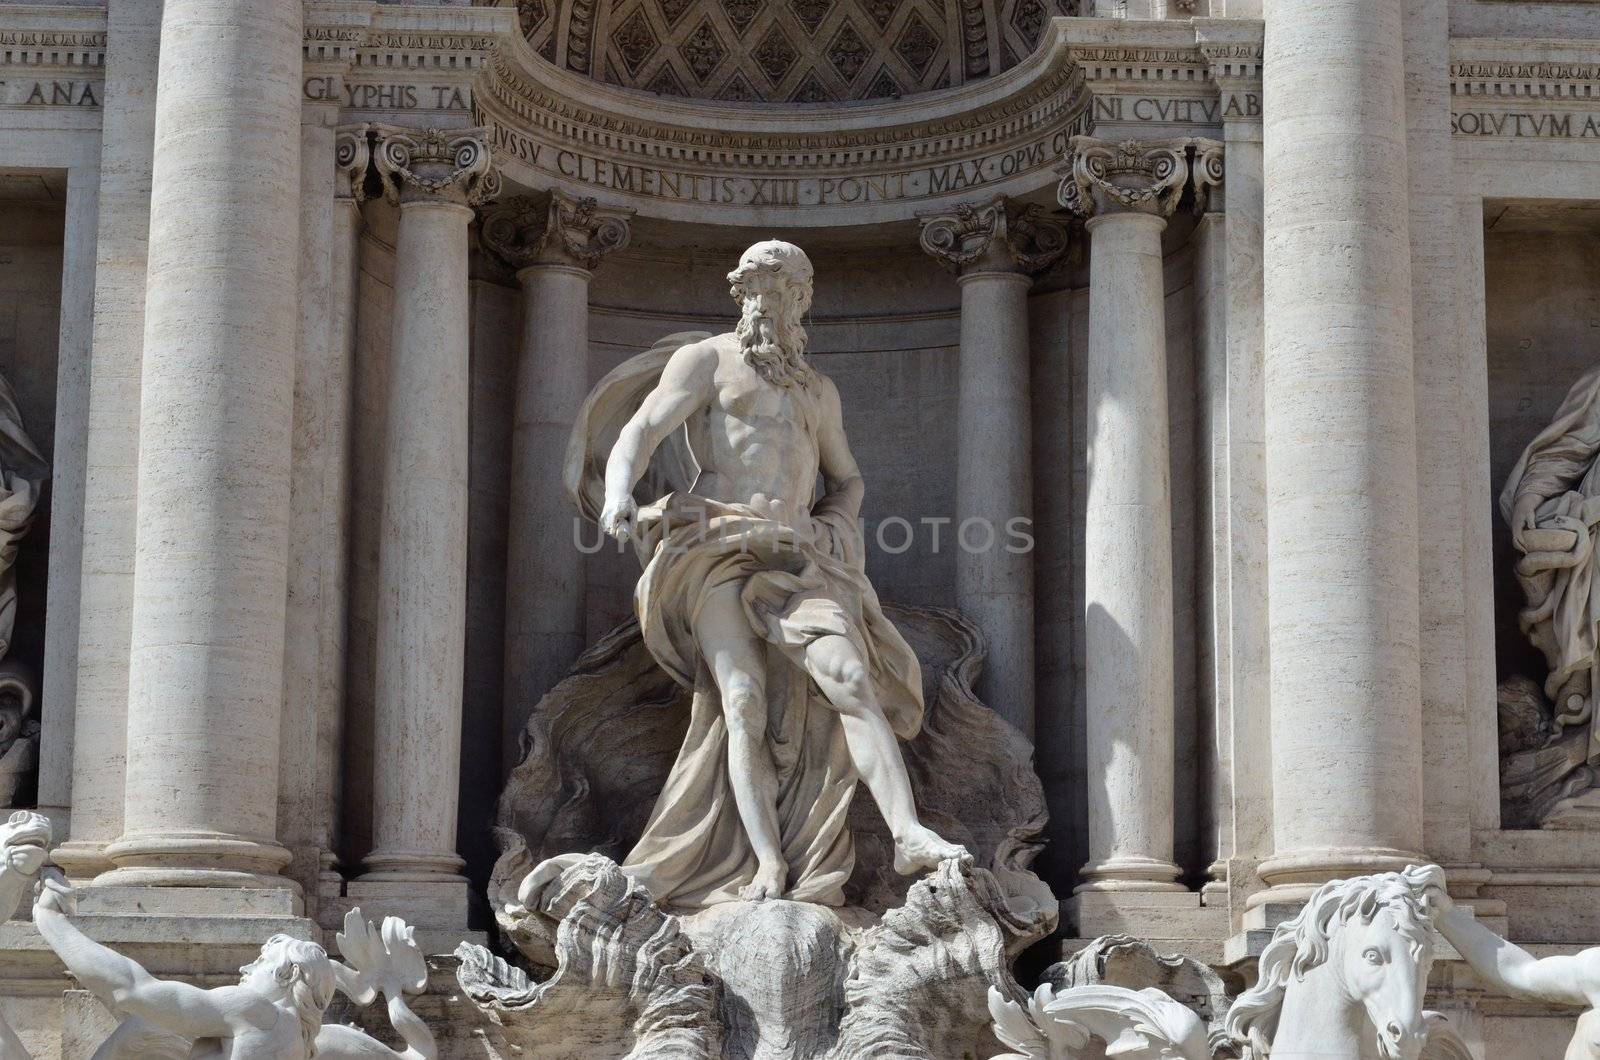 The statue of Neptune, part of the Trevi Fountain, Rome